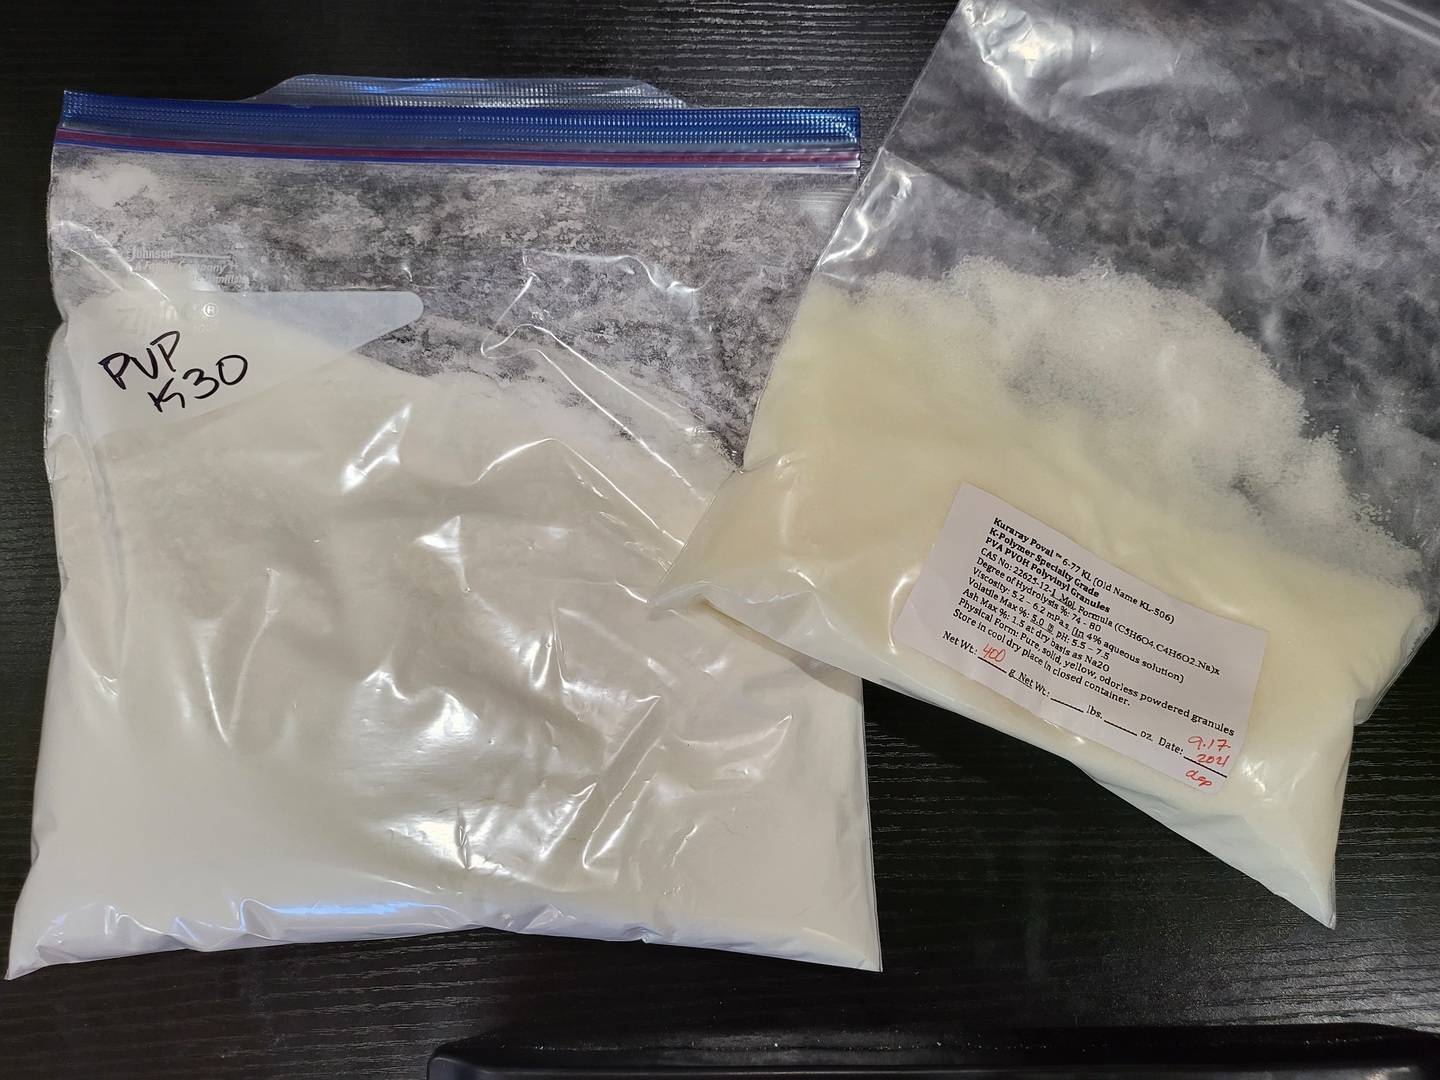 gallon bags of PVP-K30 and PVA